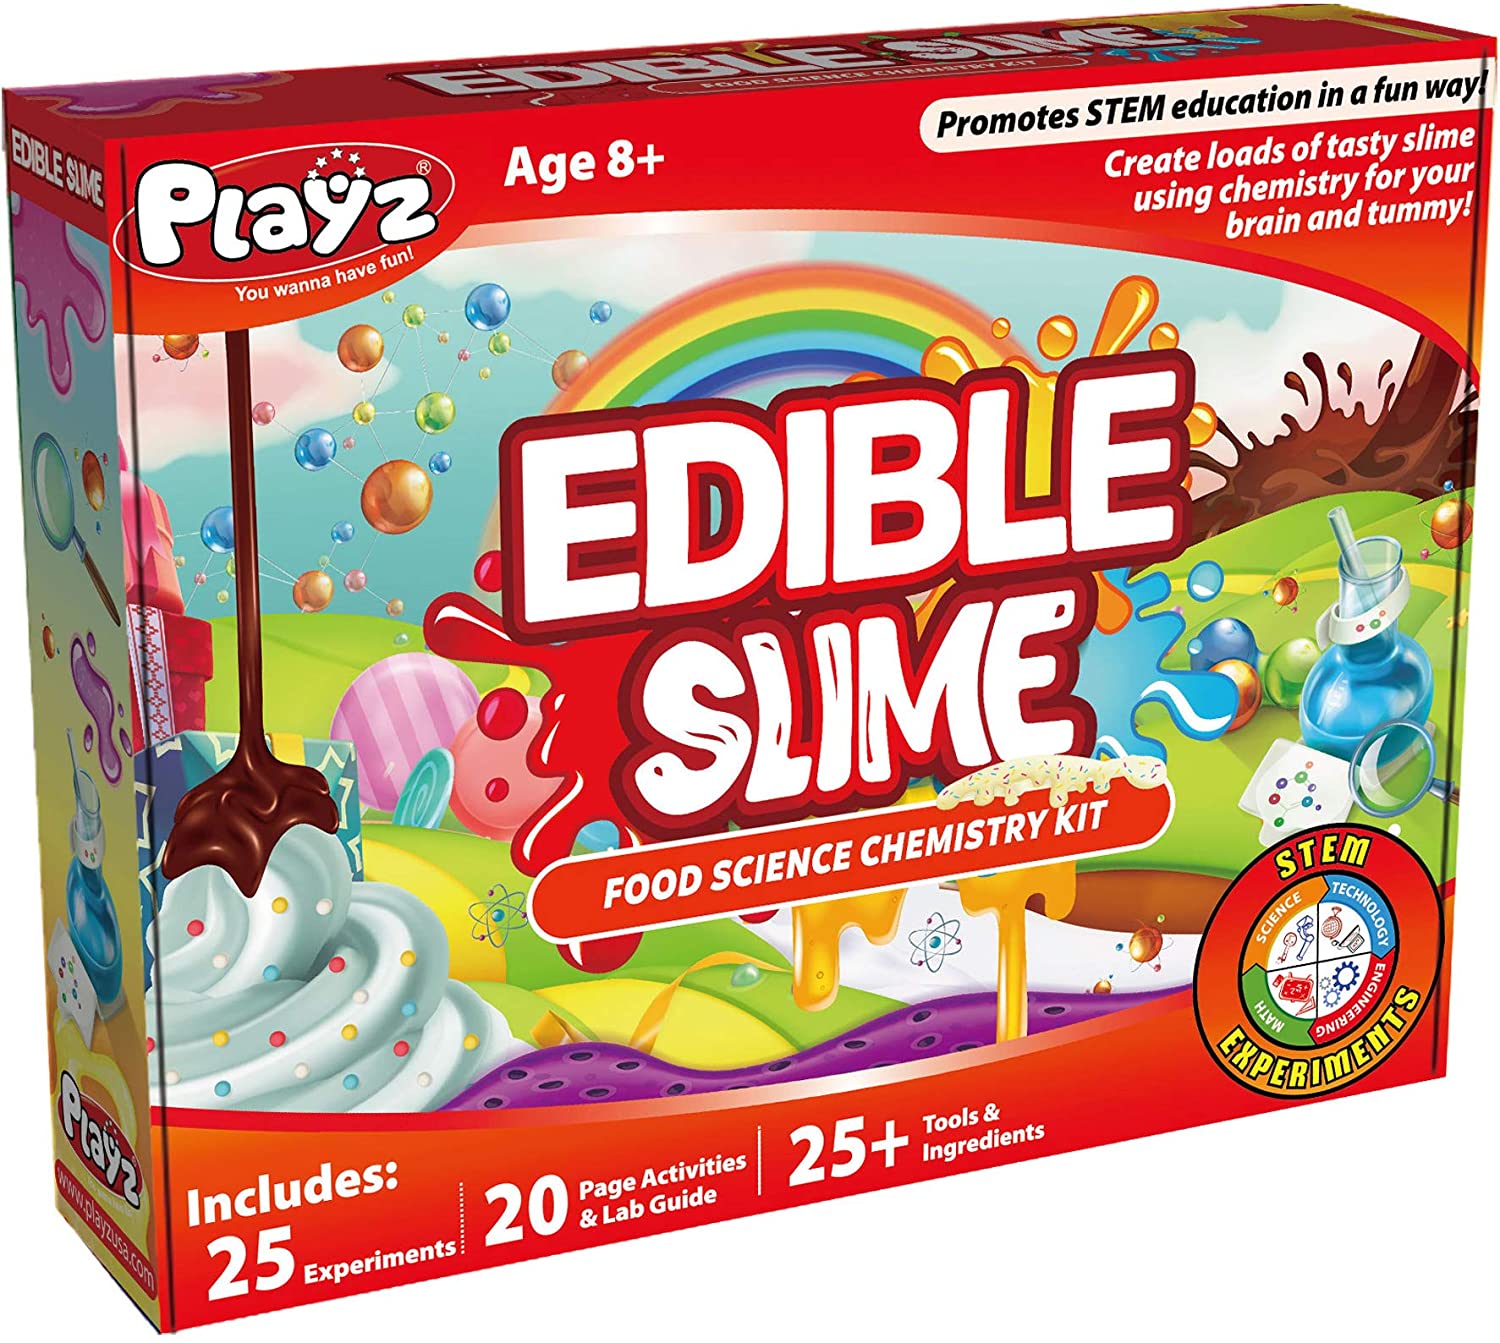 Playz Edible Slime Candy Making Food Science Chemistry Kit for Kids w/ 25+ STEM Experiments $19.95 + Free Shipping